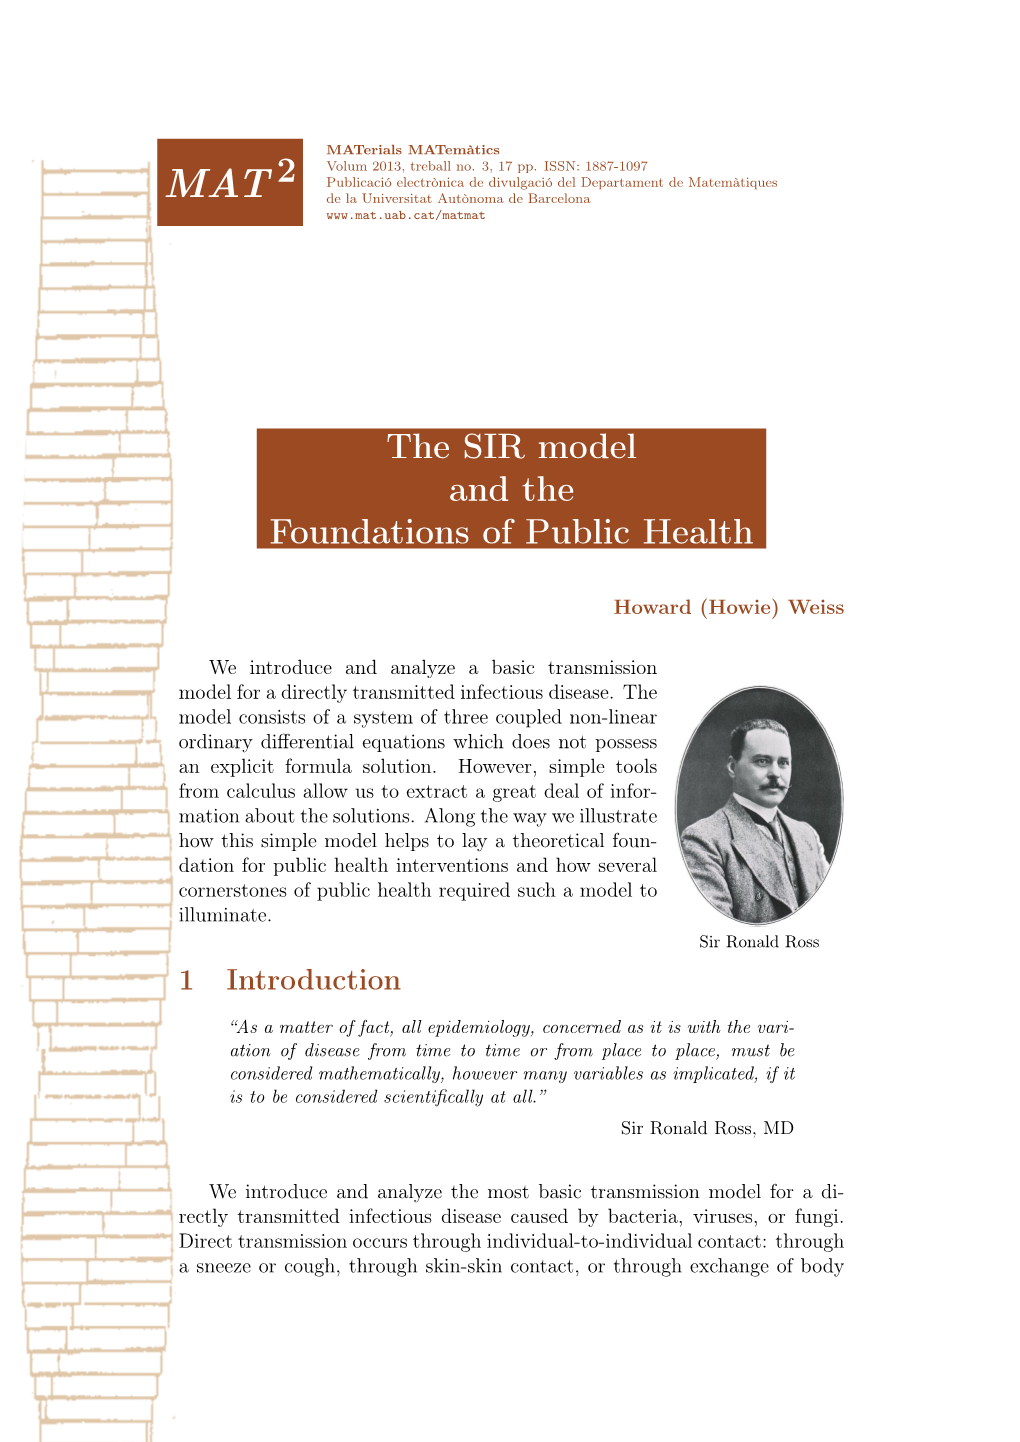 The SIR Model and the Foundations of Public Health